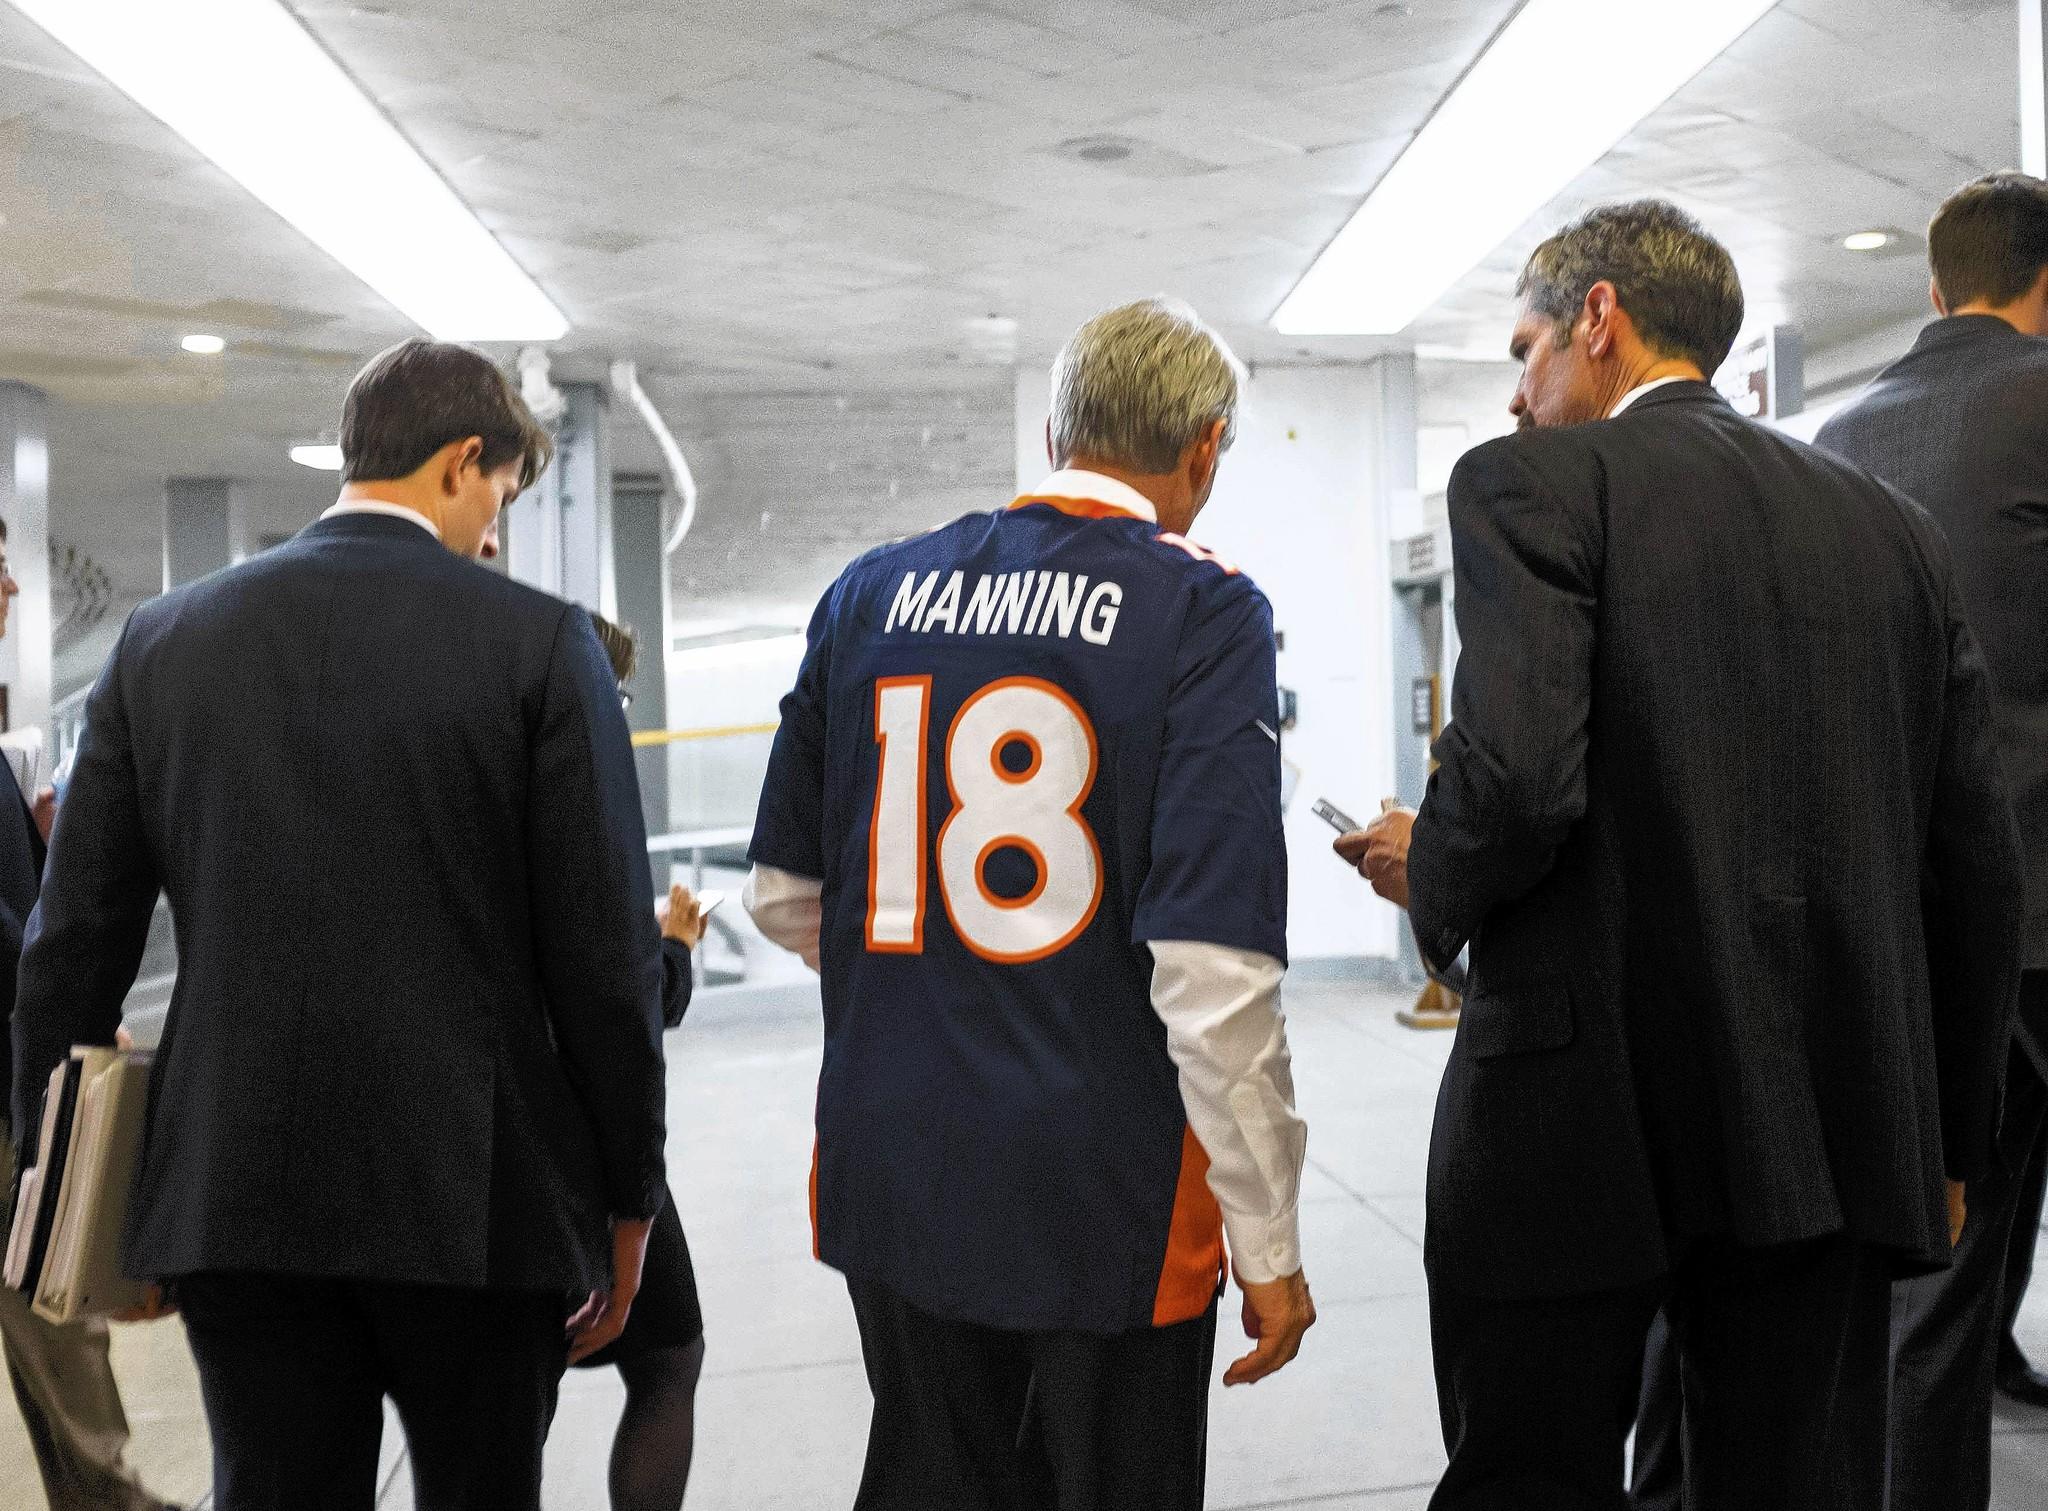 Sen. Mark Udall, D-Colo., wears a football jersey from the Denver Broncos, the team liberals should root for Sunday during the Super Bowl.